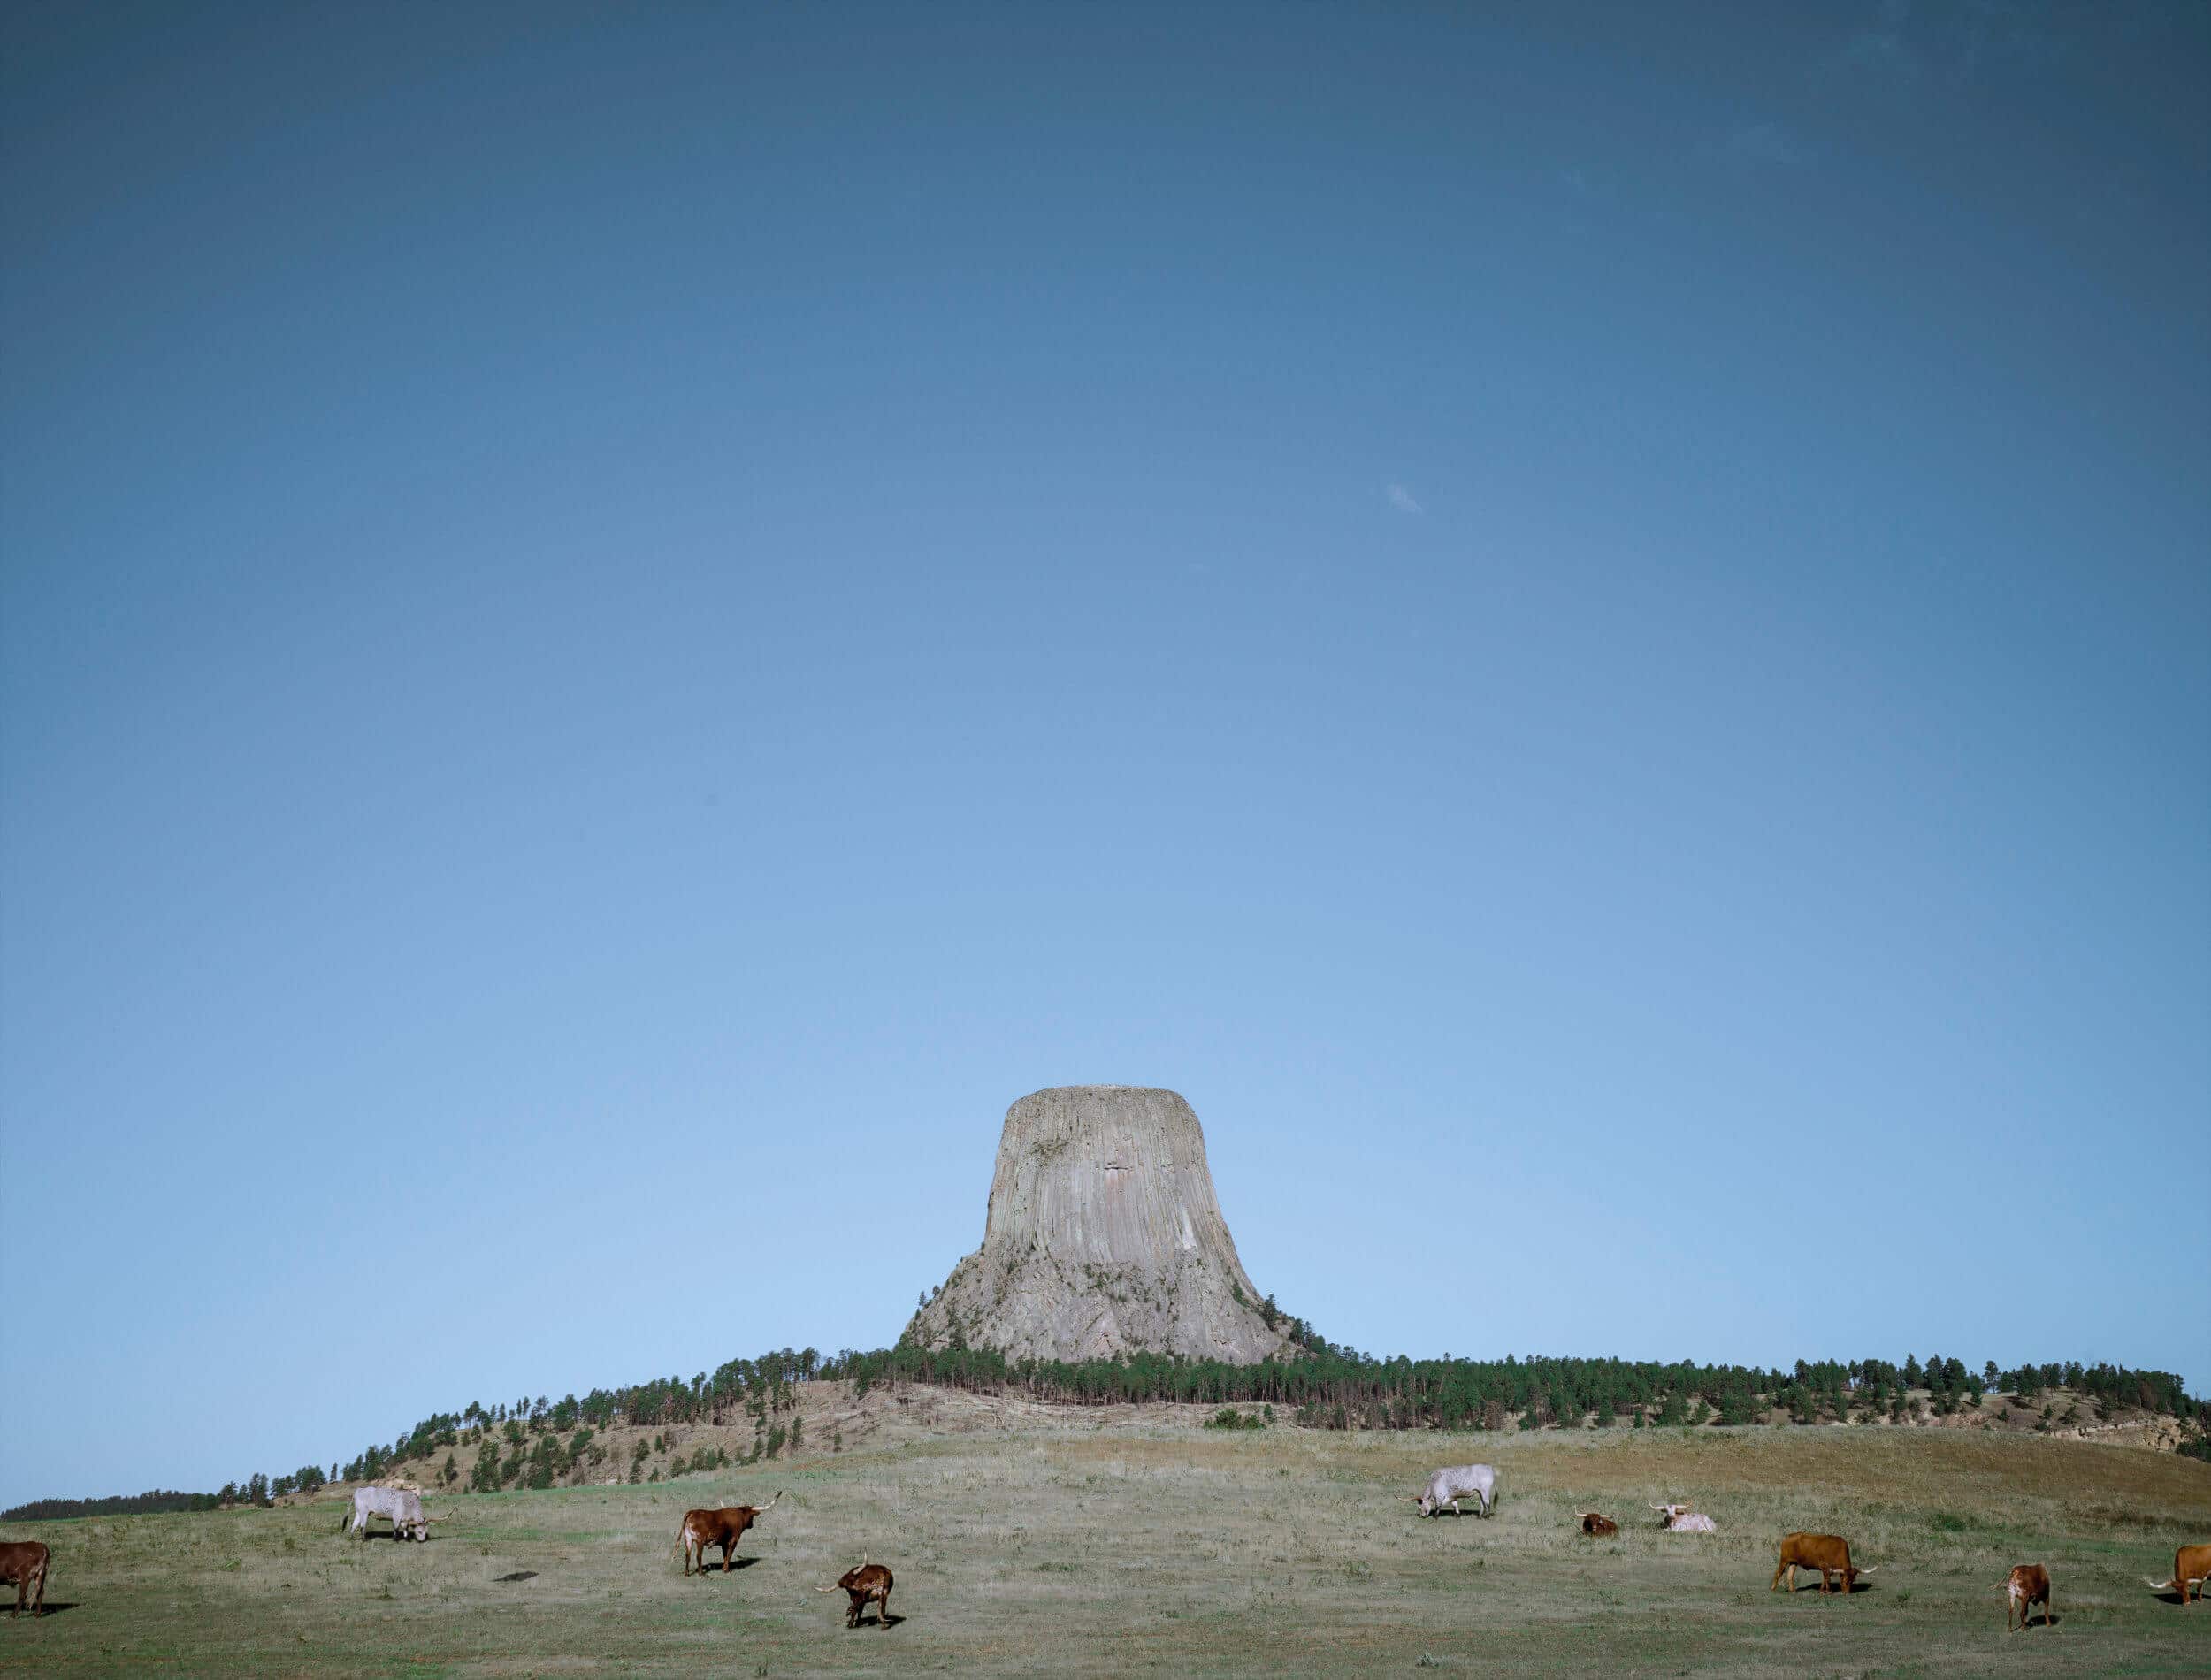 Longhorns pasturing at a field outside Devil's Tower, WY